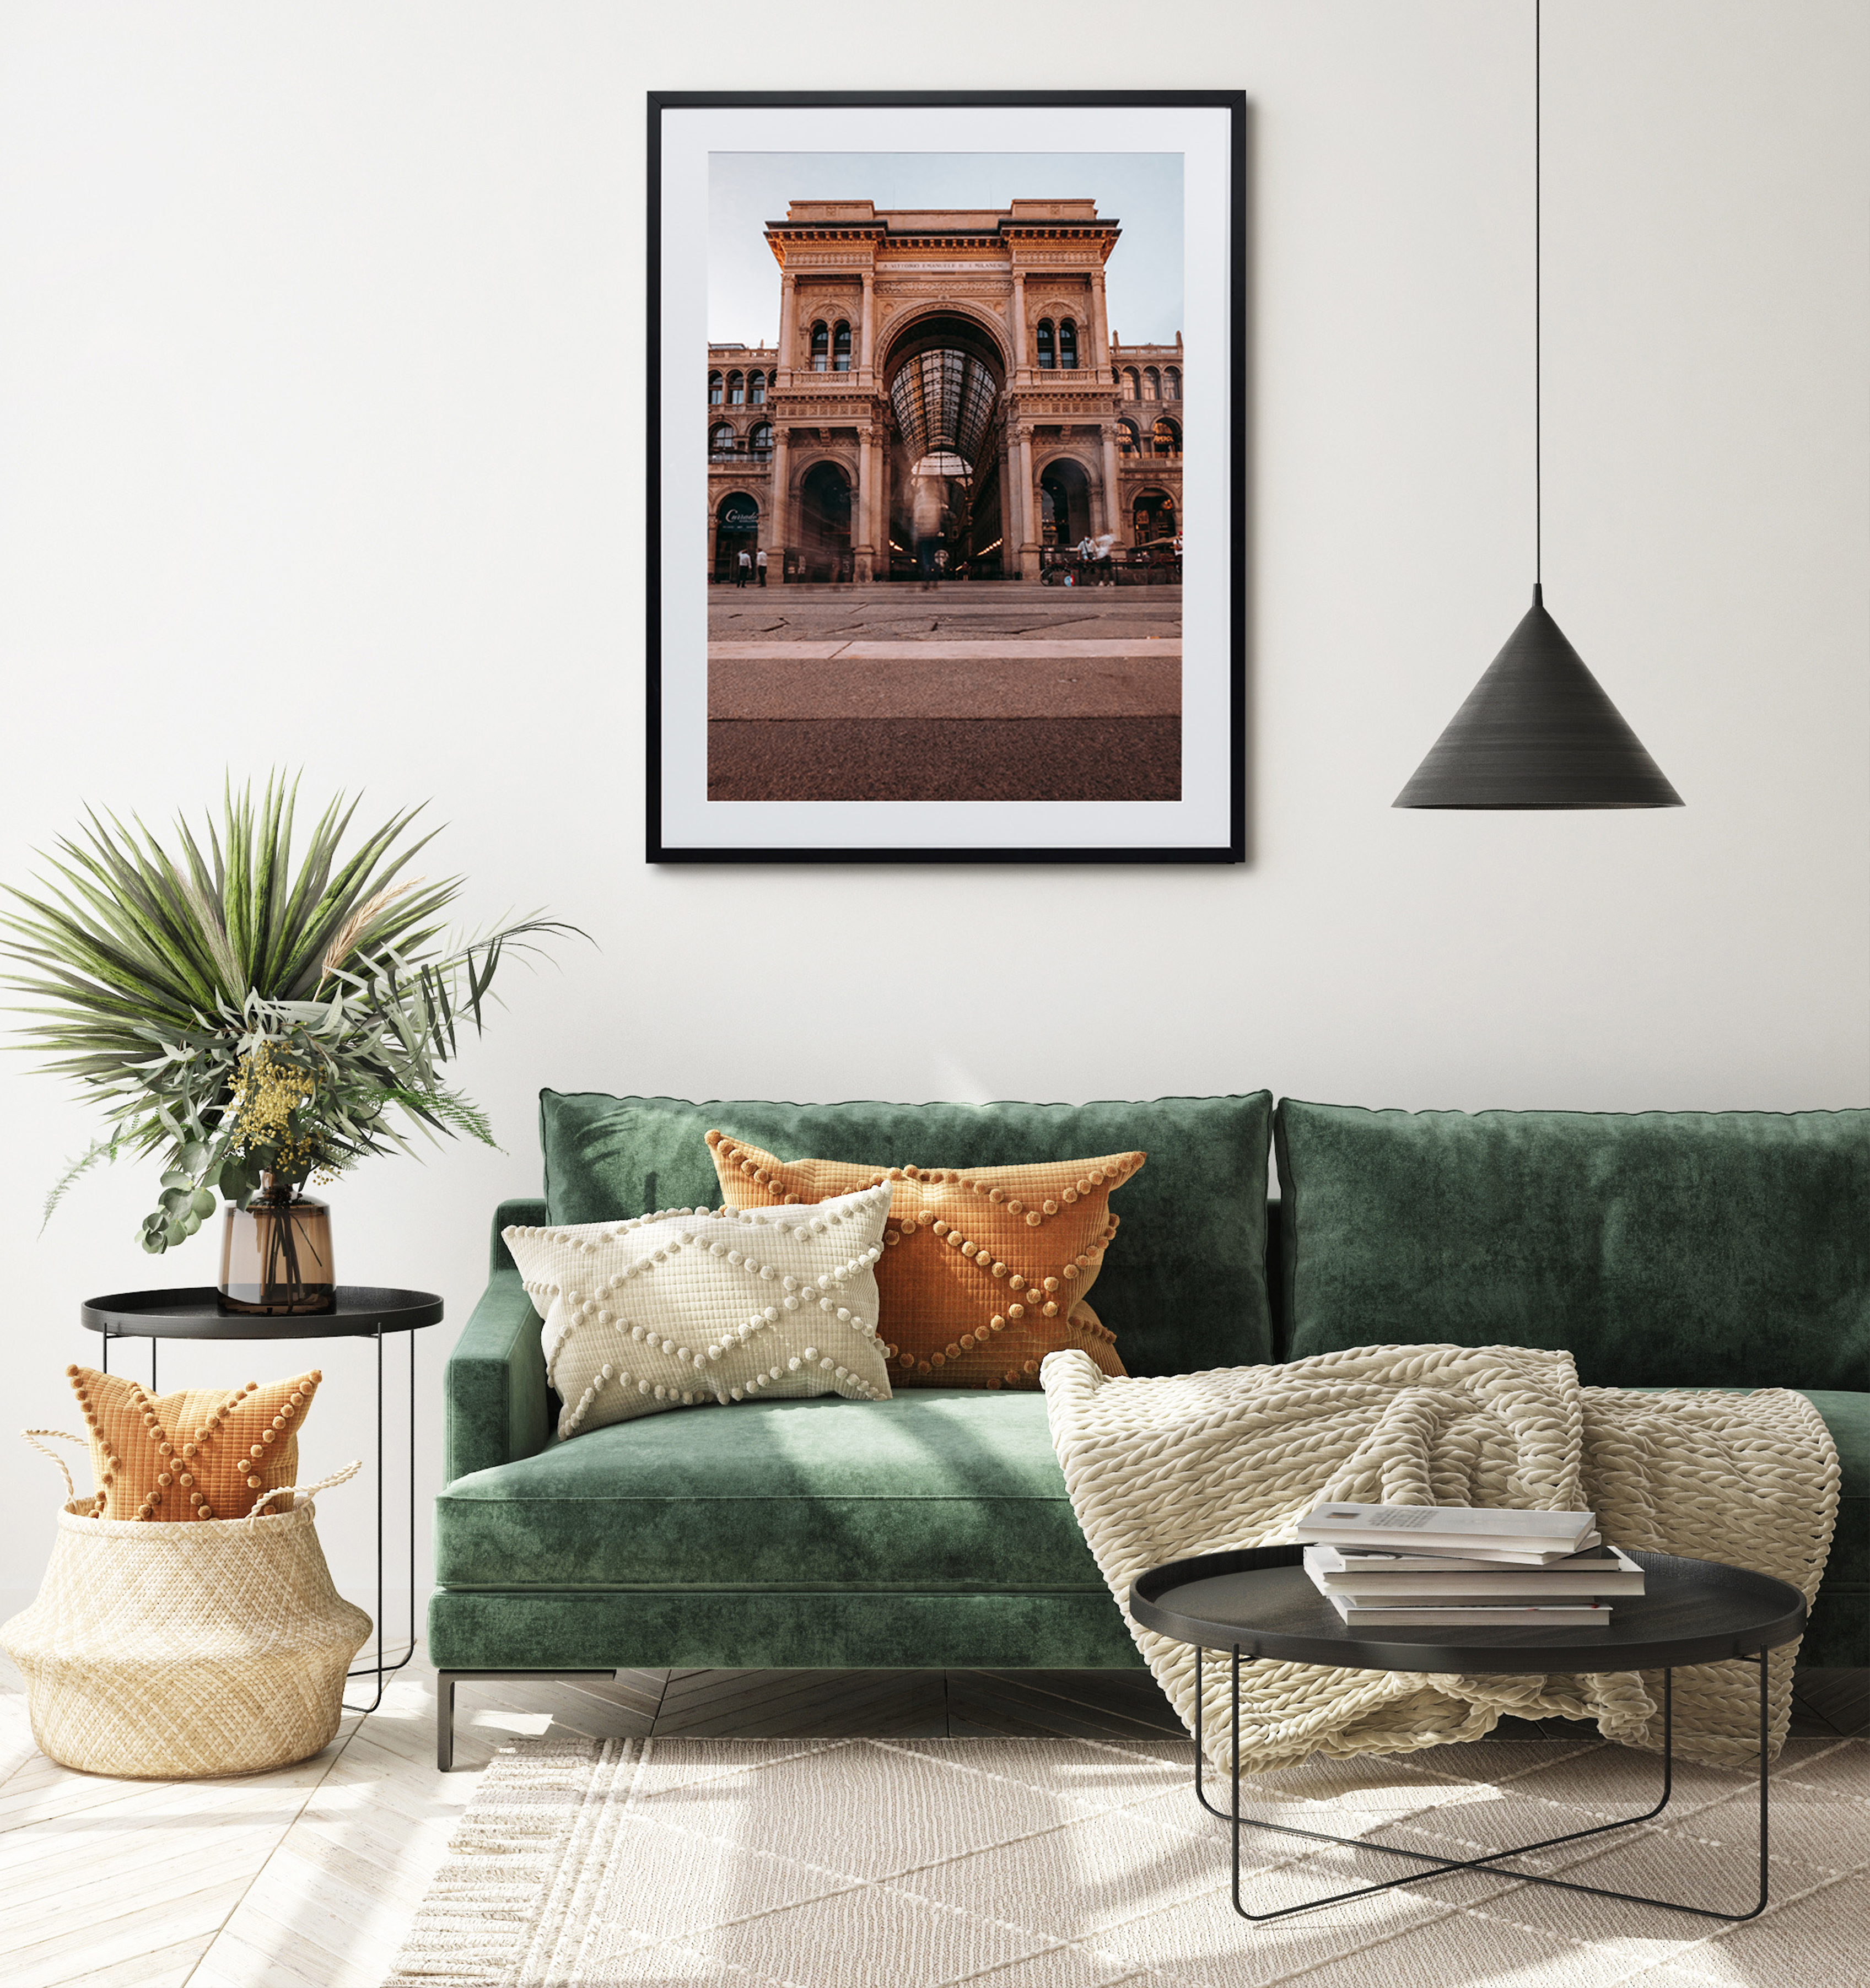 Framed print of a building on a white wall